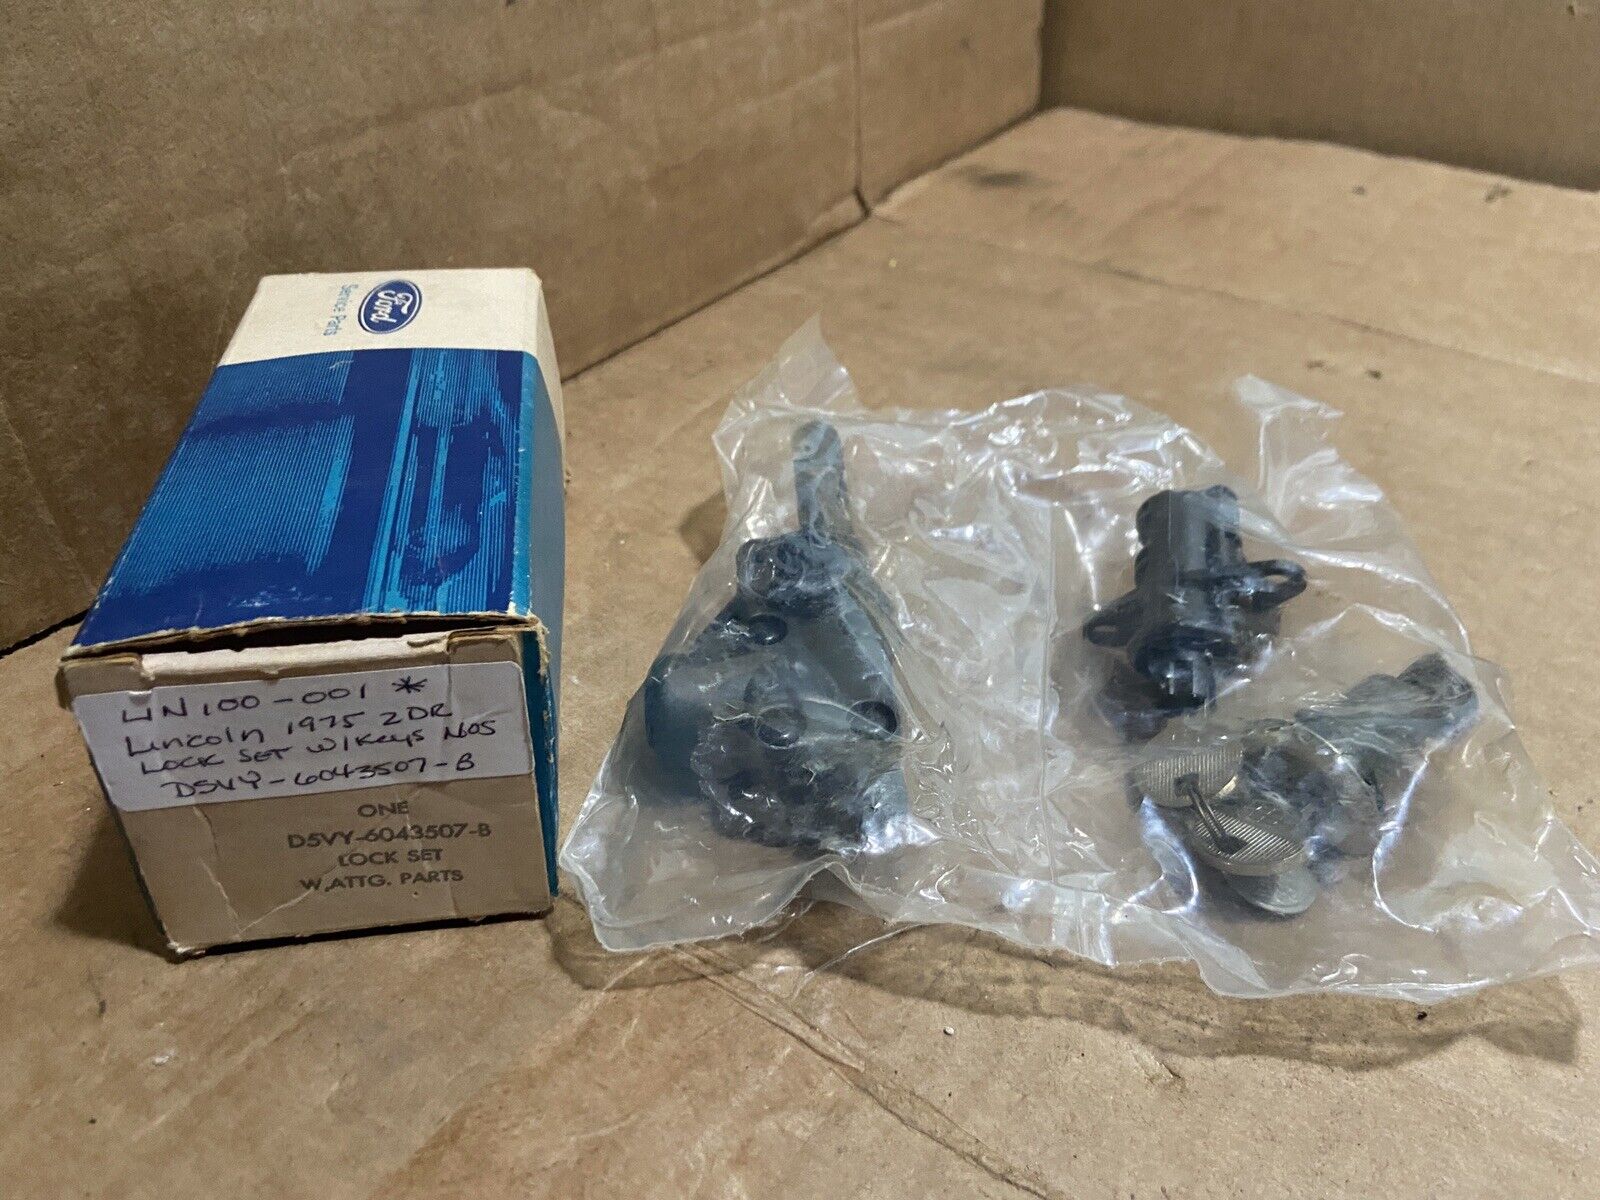 Ford D5VY-6043507-B Lock Set -- Trunk, Spare Tire & Glove Box - 1975 Continental